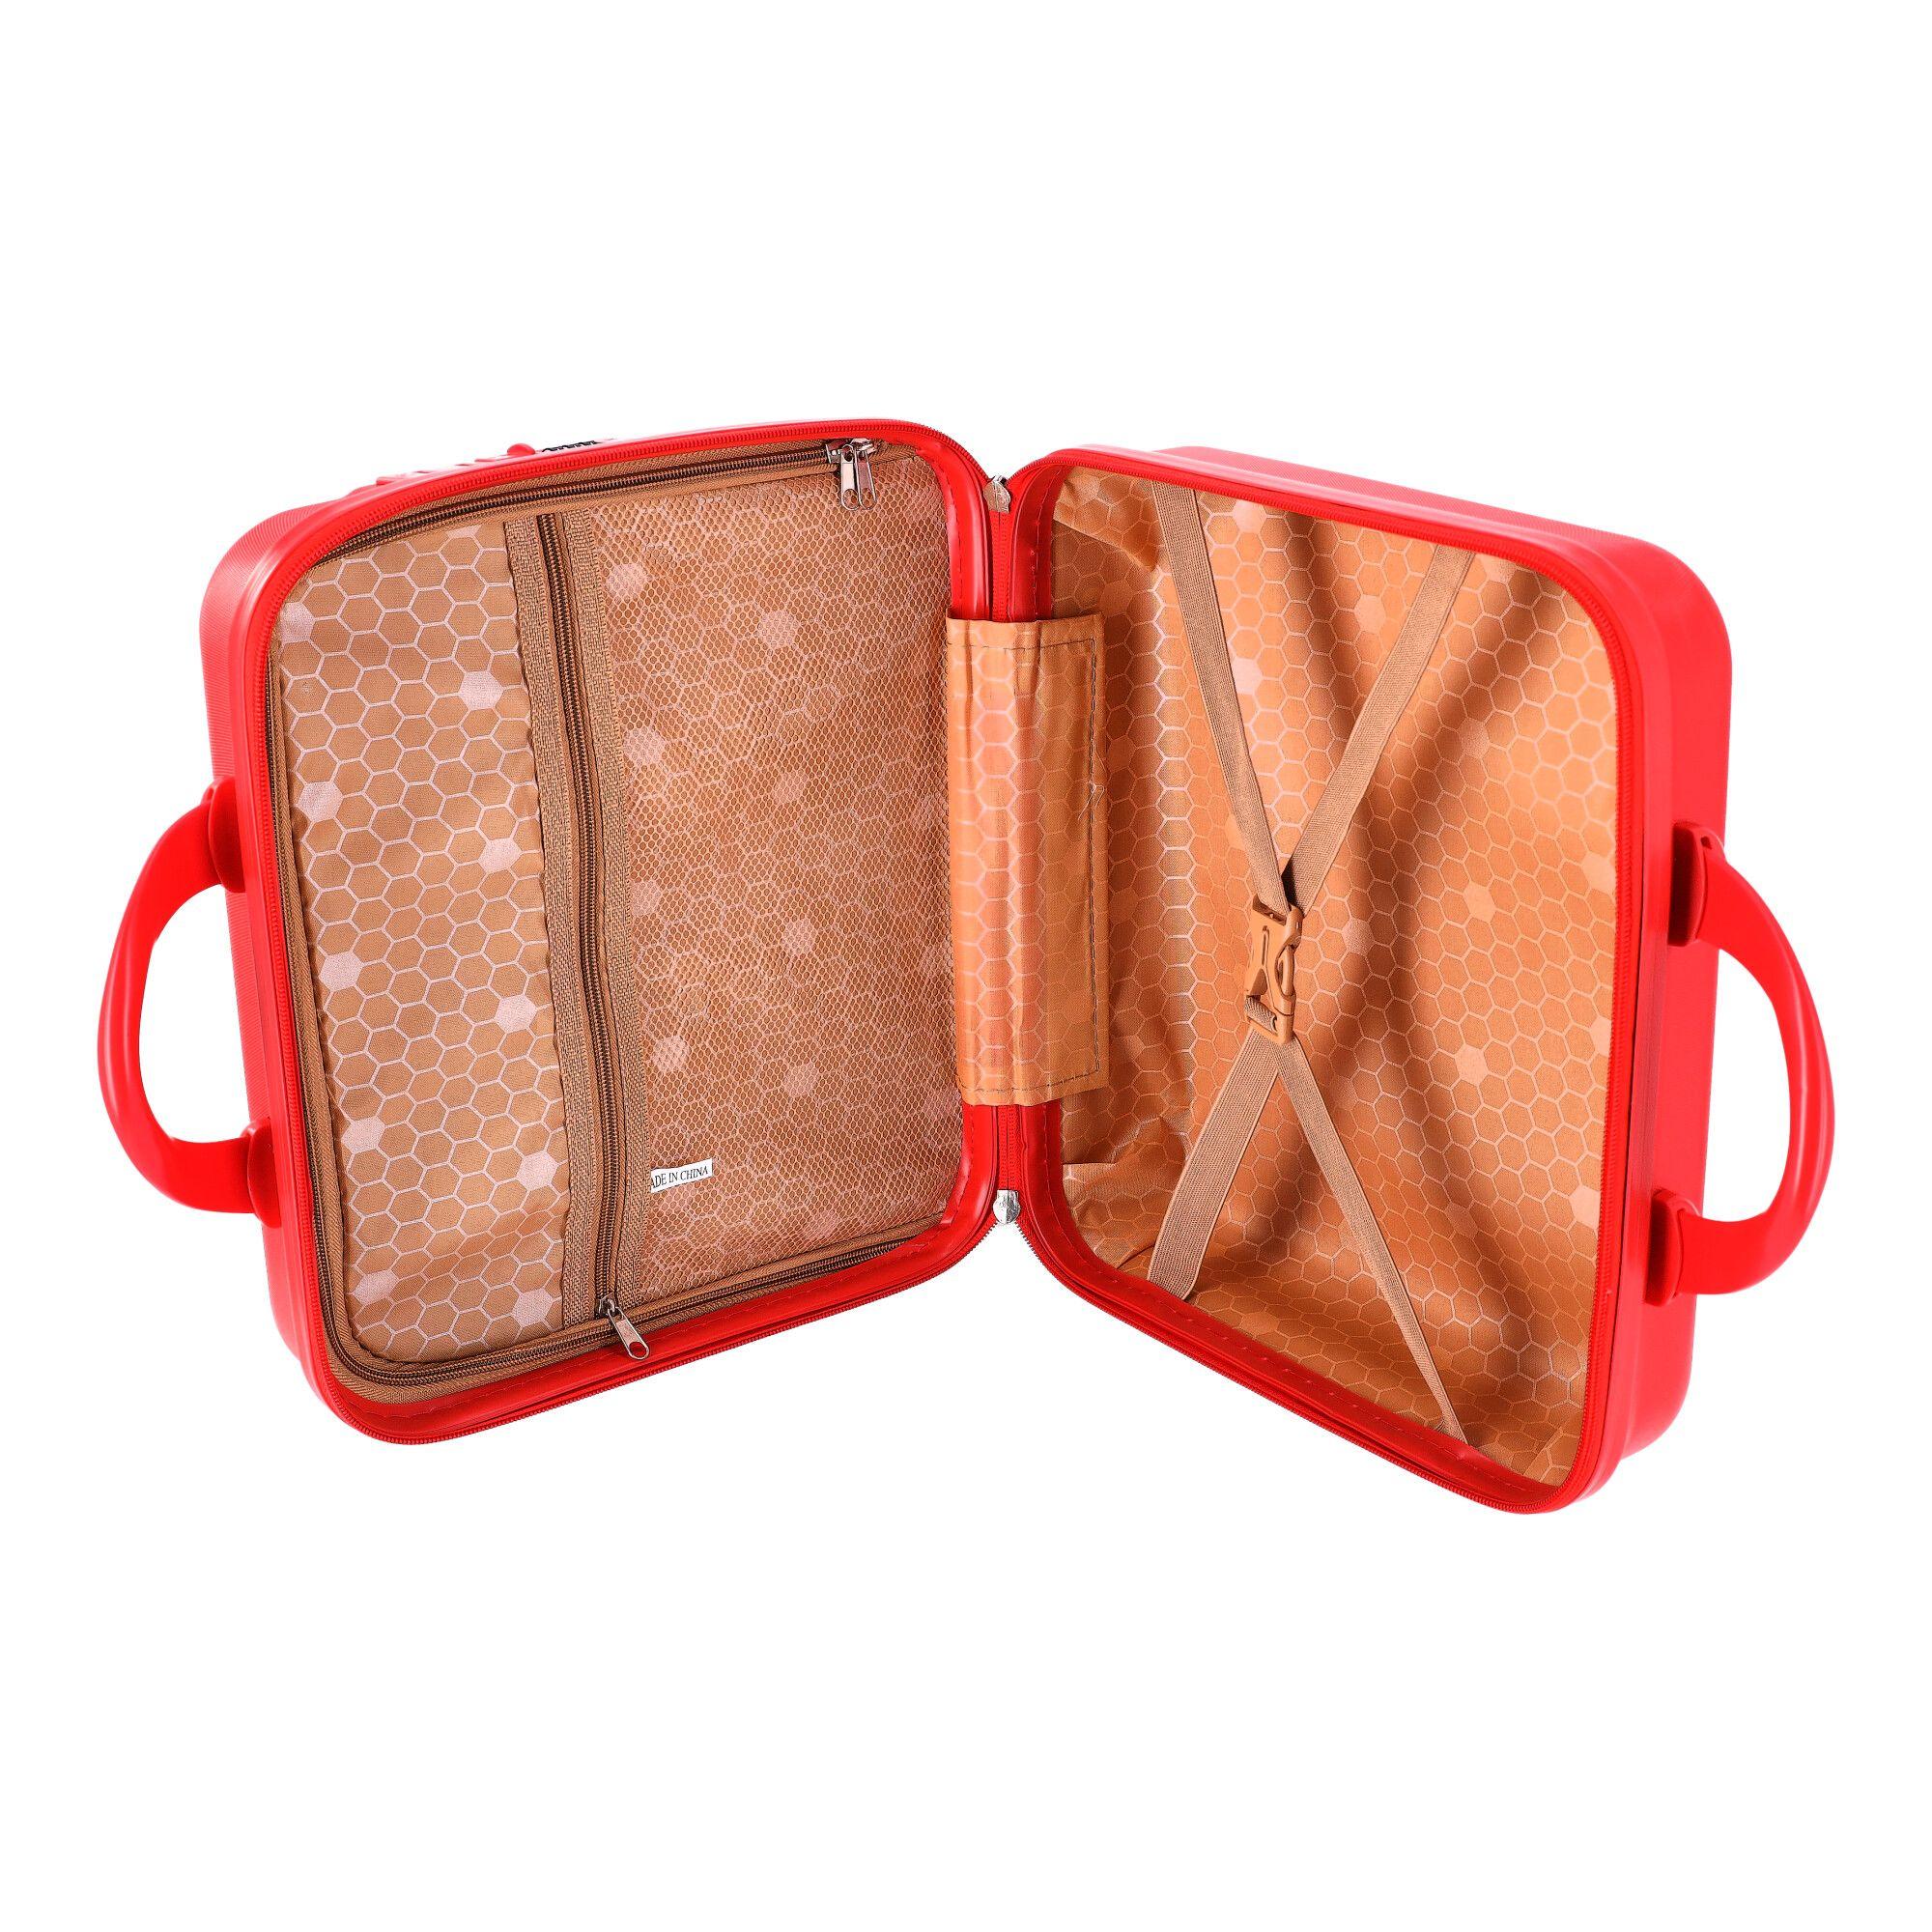 Children's luggage / Lovely travel cosmetic bag - red